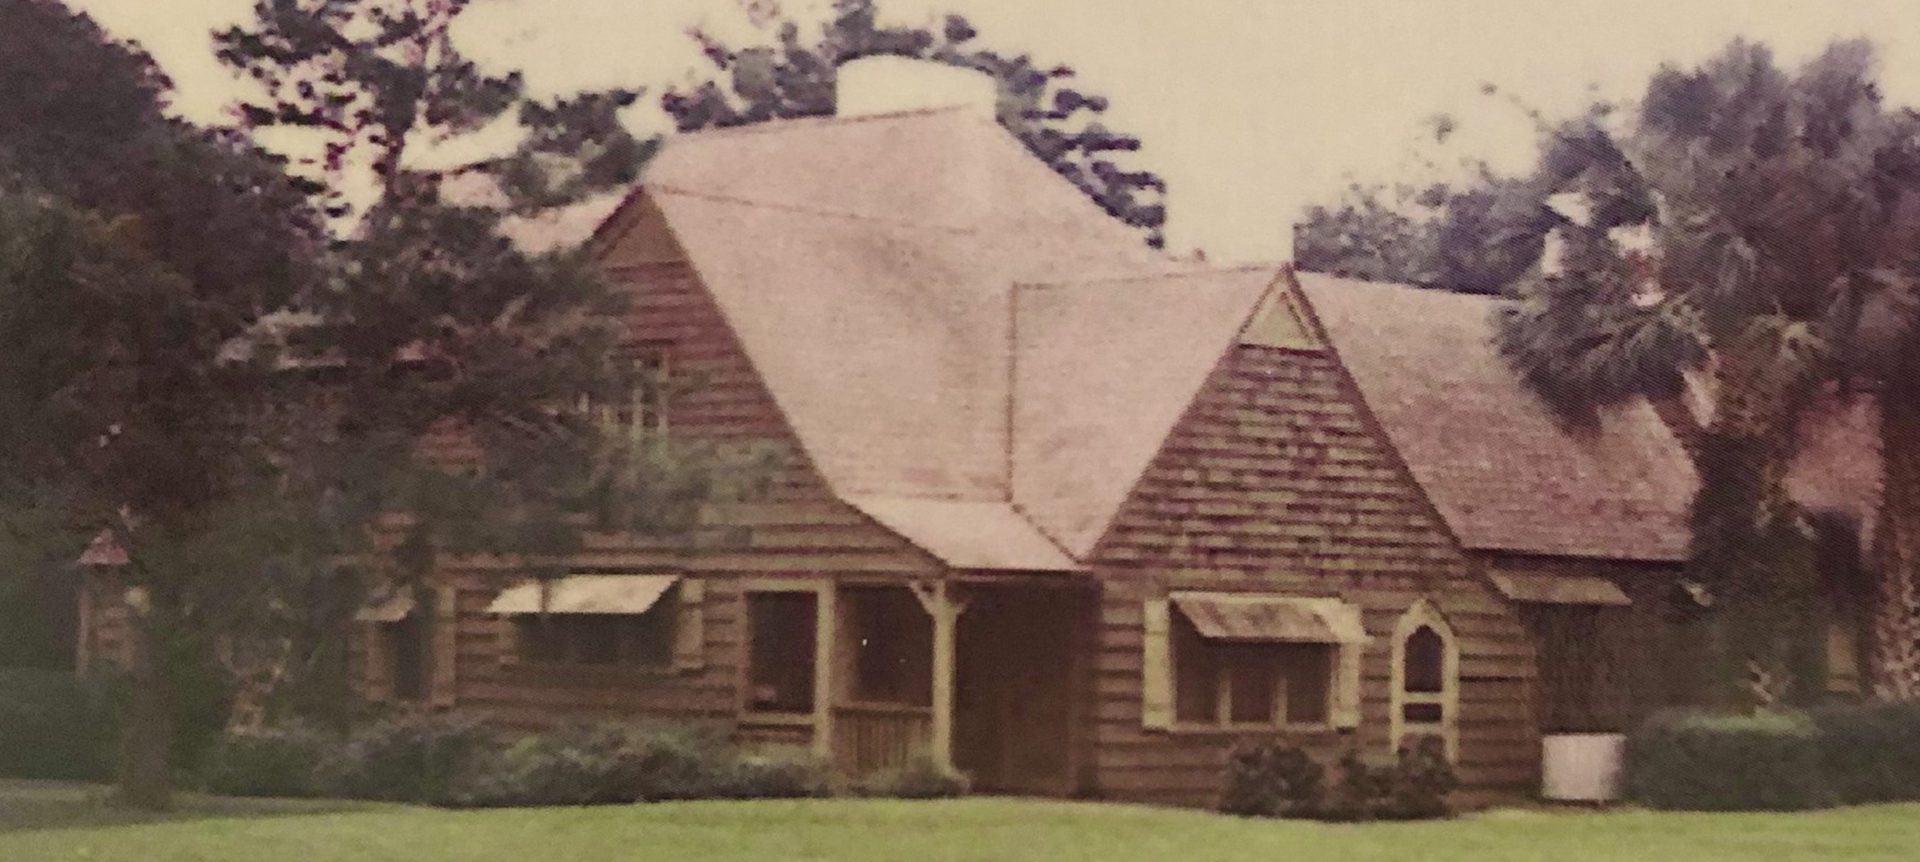 William T. Bland House